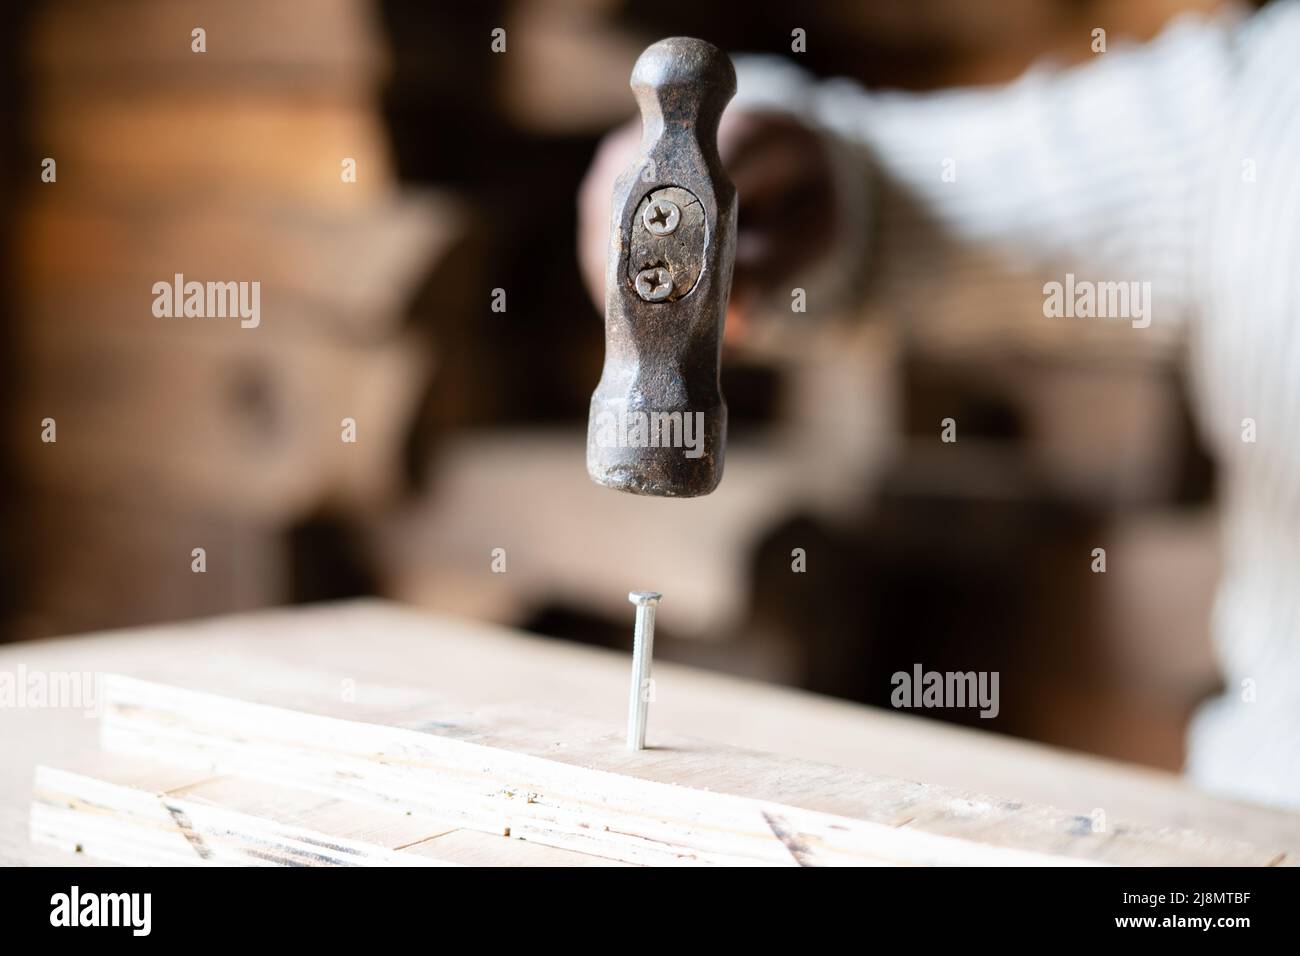 Close up shot of carpenter hands hitting nail to wood using hammer at shop - concept of workshop, woodworker and craftsman Stock Photo